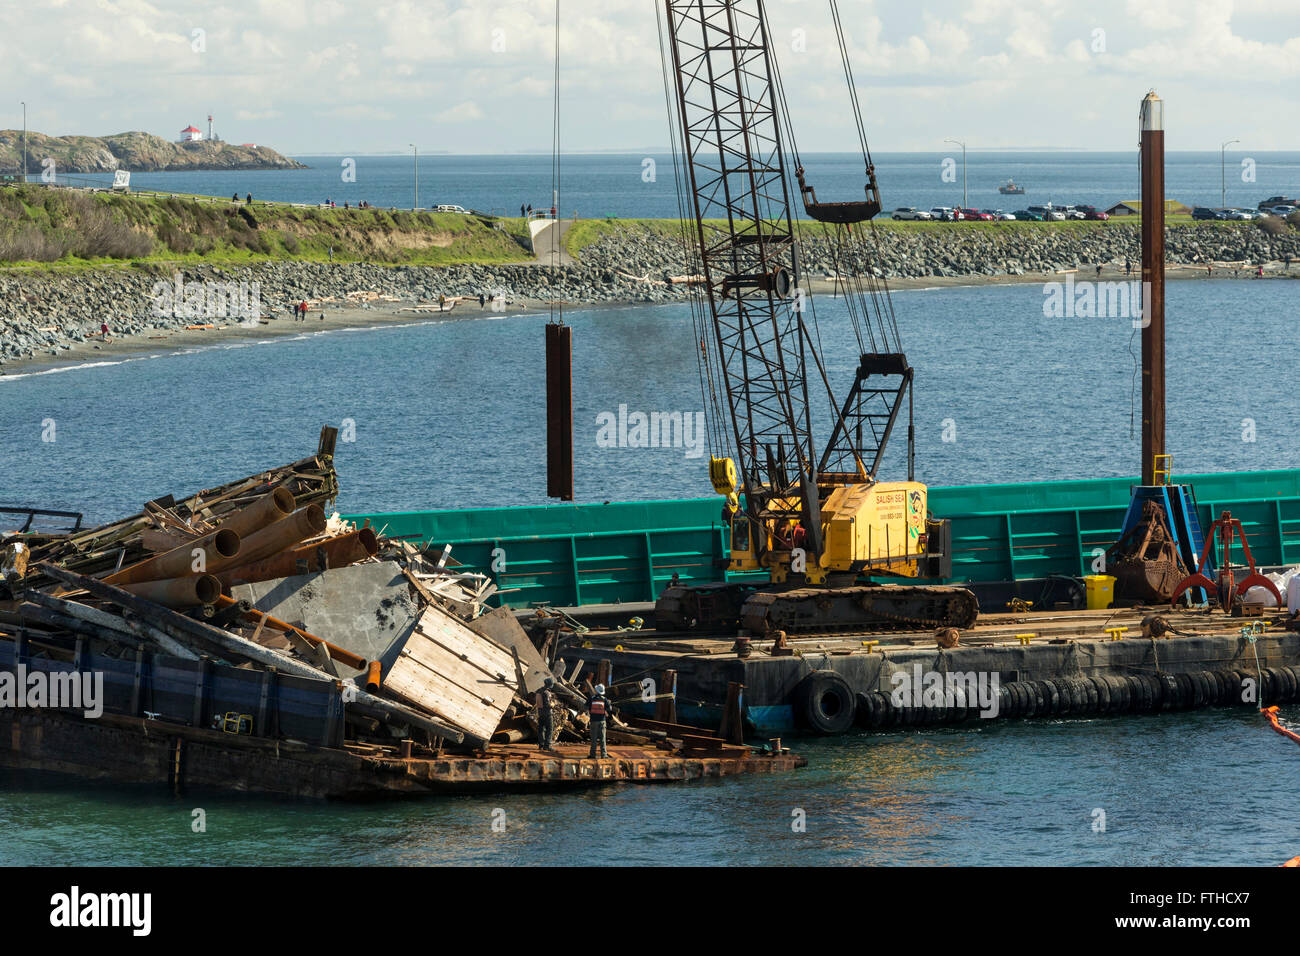 Beached stranded barge with load of junk being unloaded by large crane at Clover Point beach-Victoria, British Columbia, Canada. Stock Photo